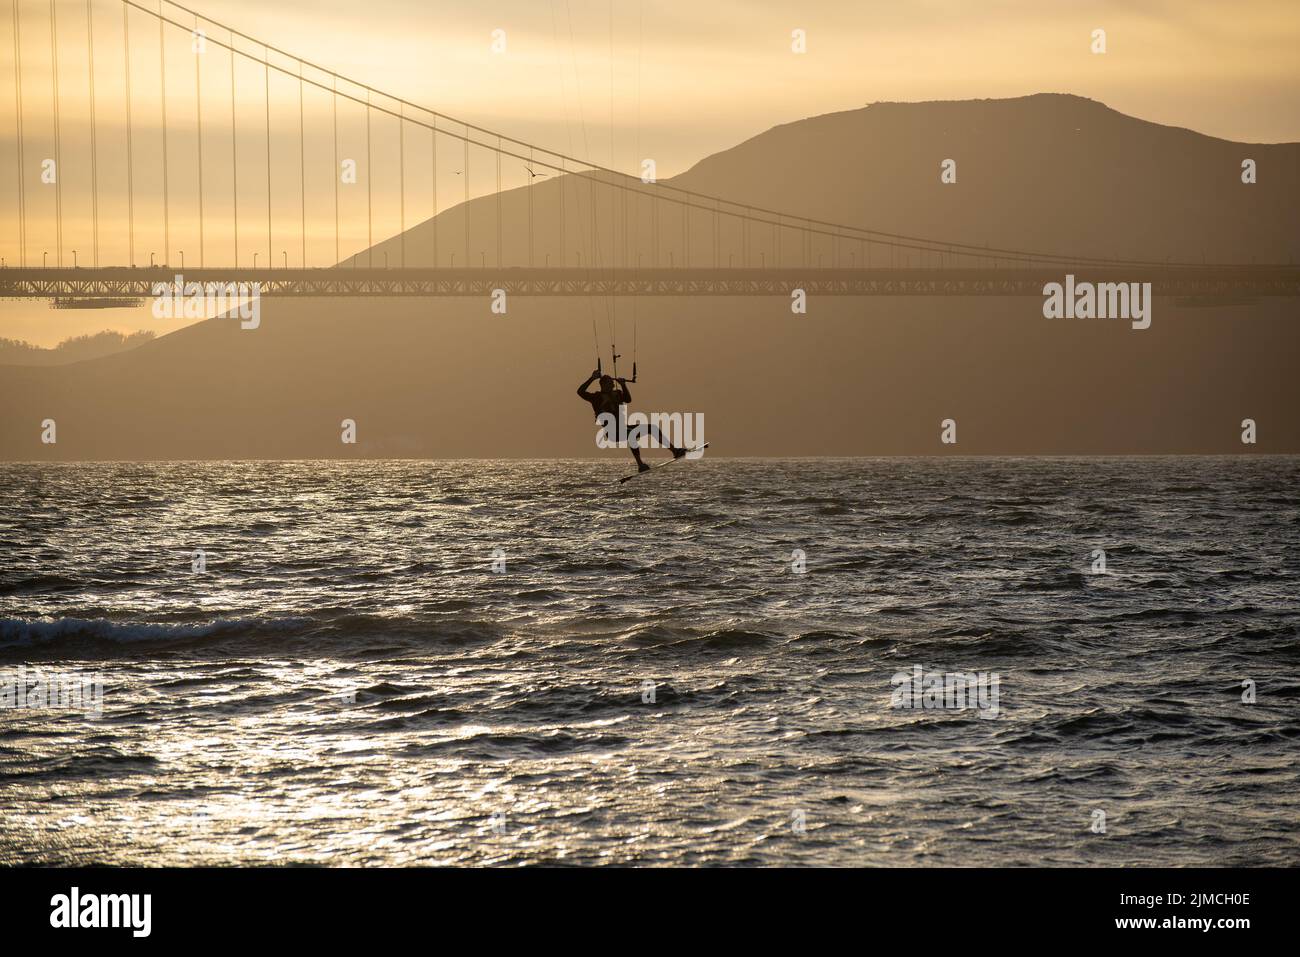 Kite surfer hanging in flight beneath the profile of the Golden Gate Bridge silhouetted against the backdrop of the Marin Headlands Stock Photo